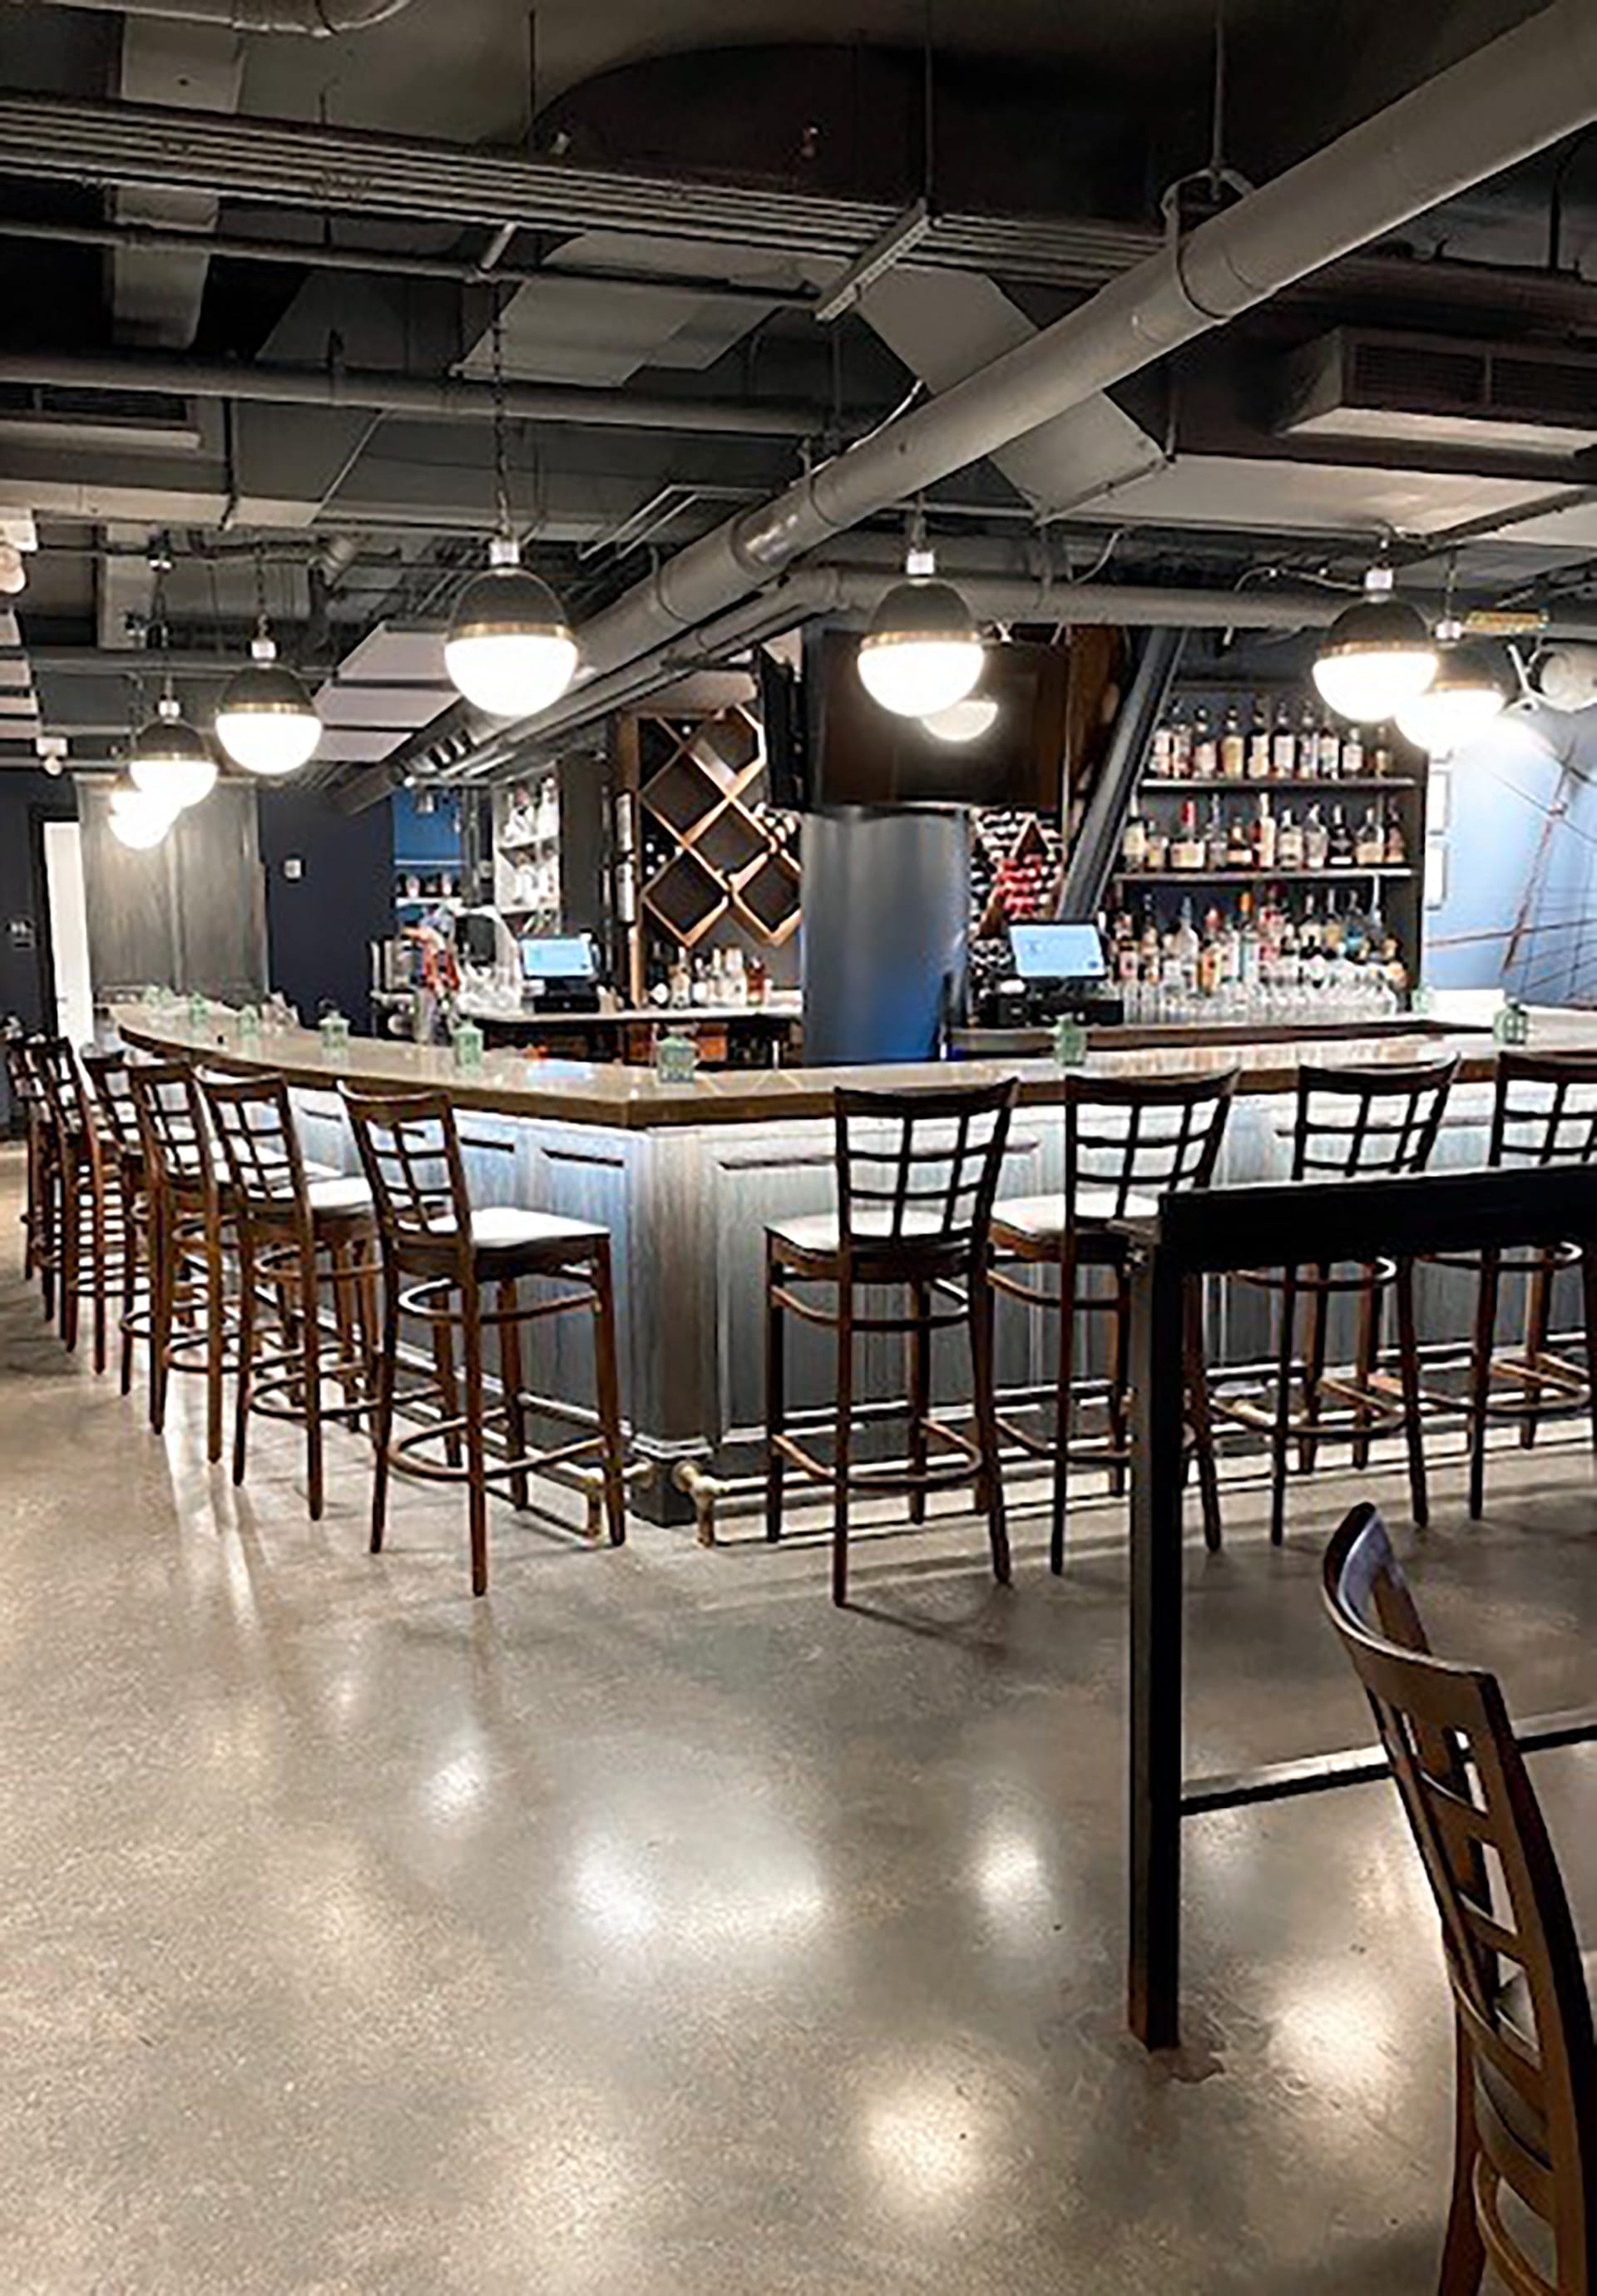 Bar with industrial roof, polished floors, under-bar lighting, and wooden barstools with backs.